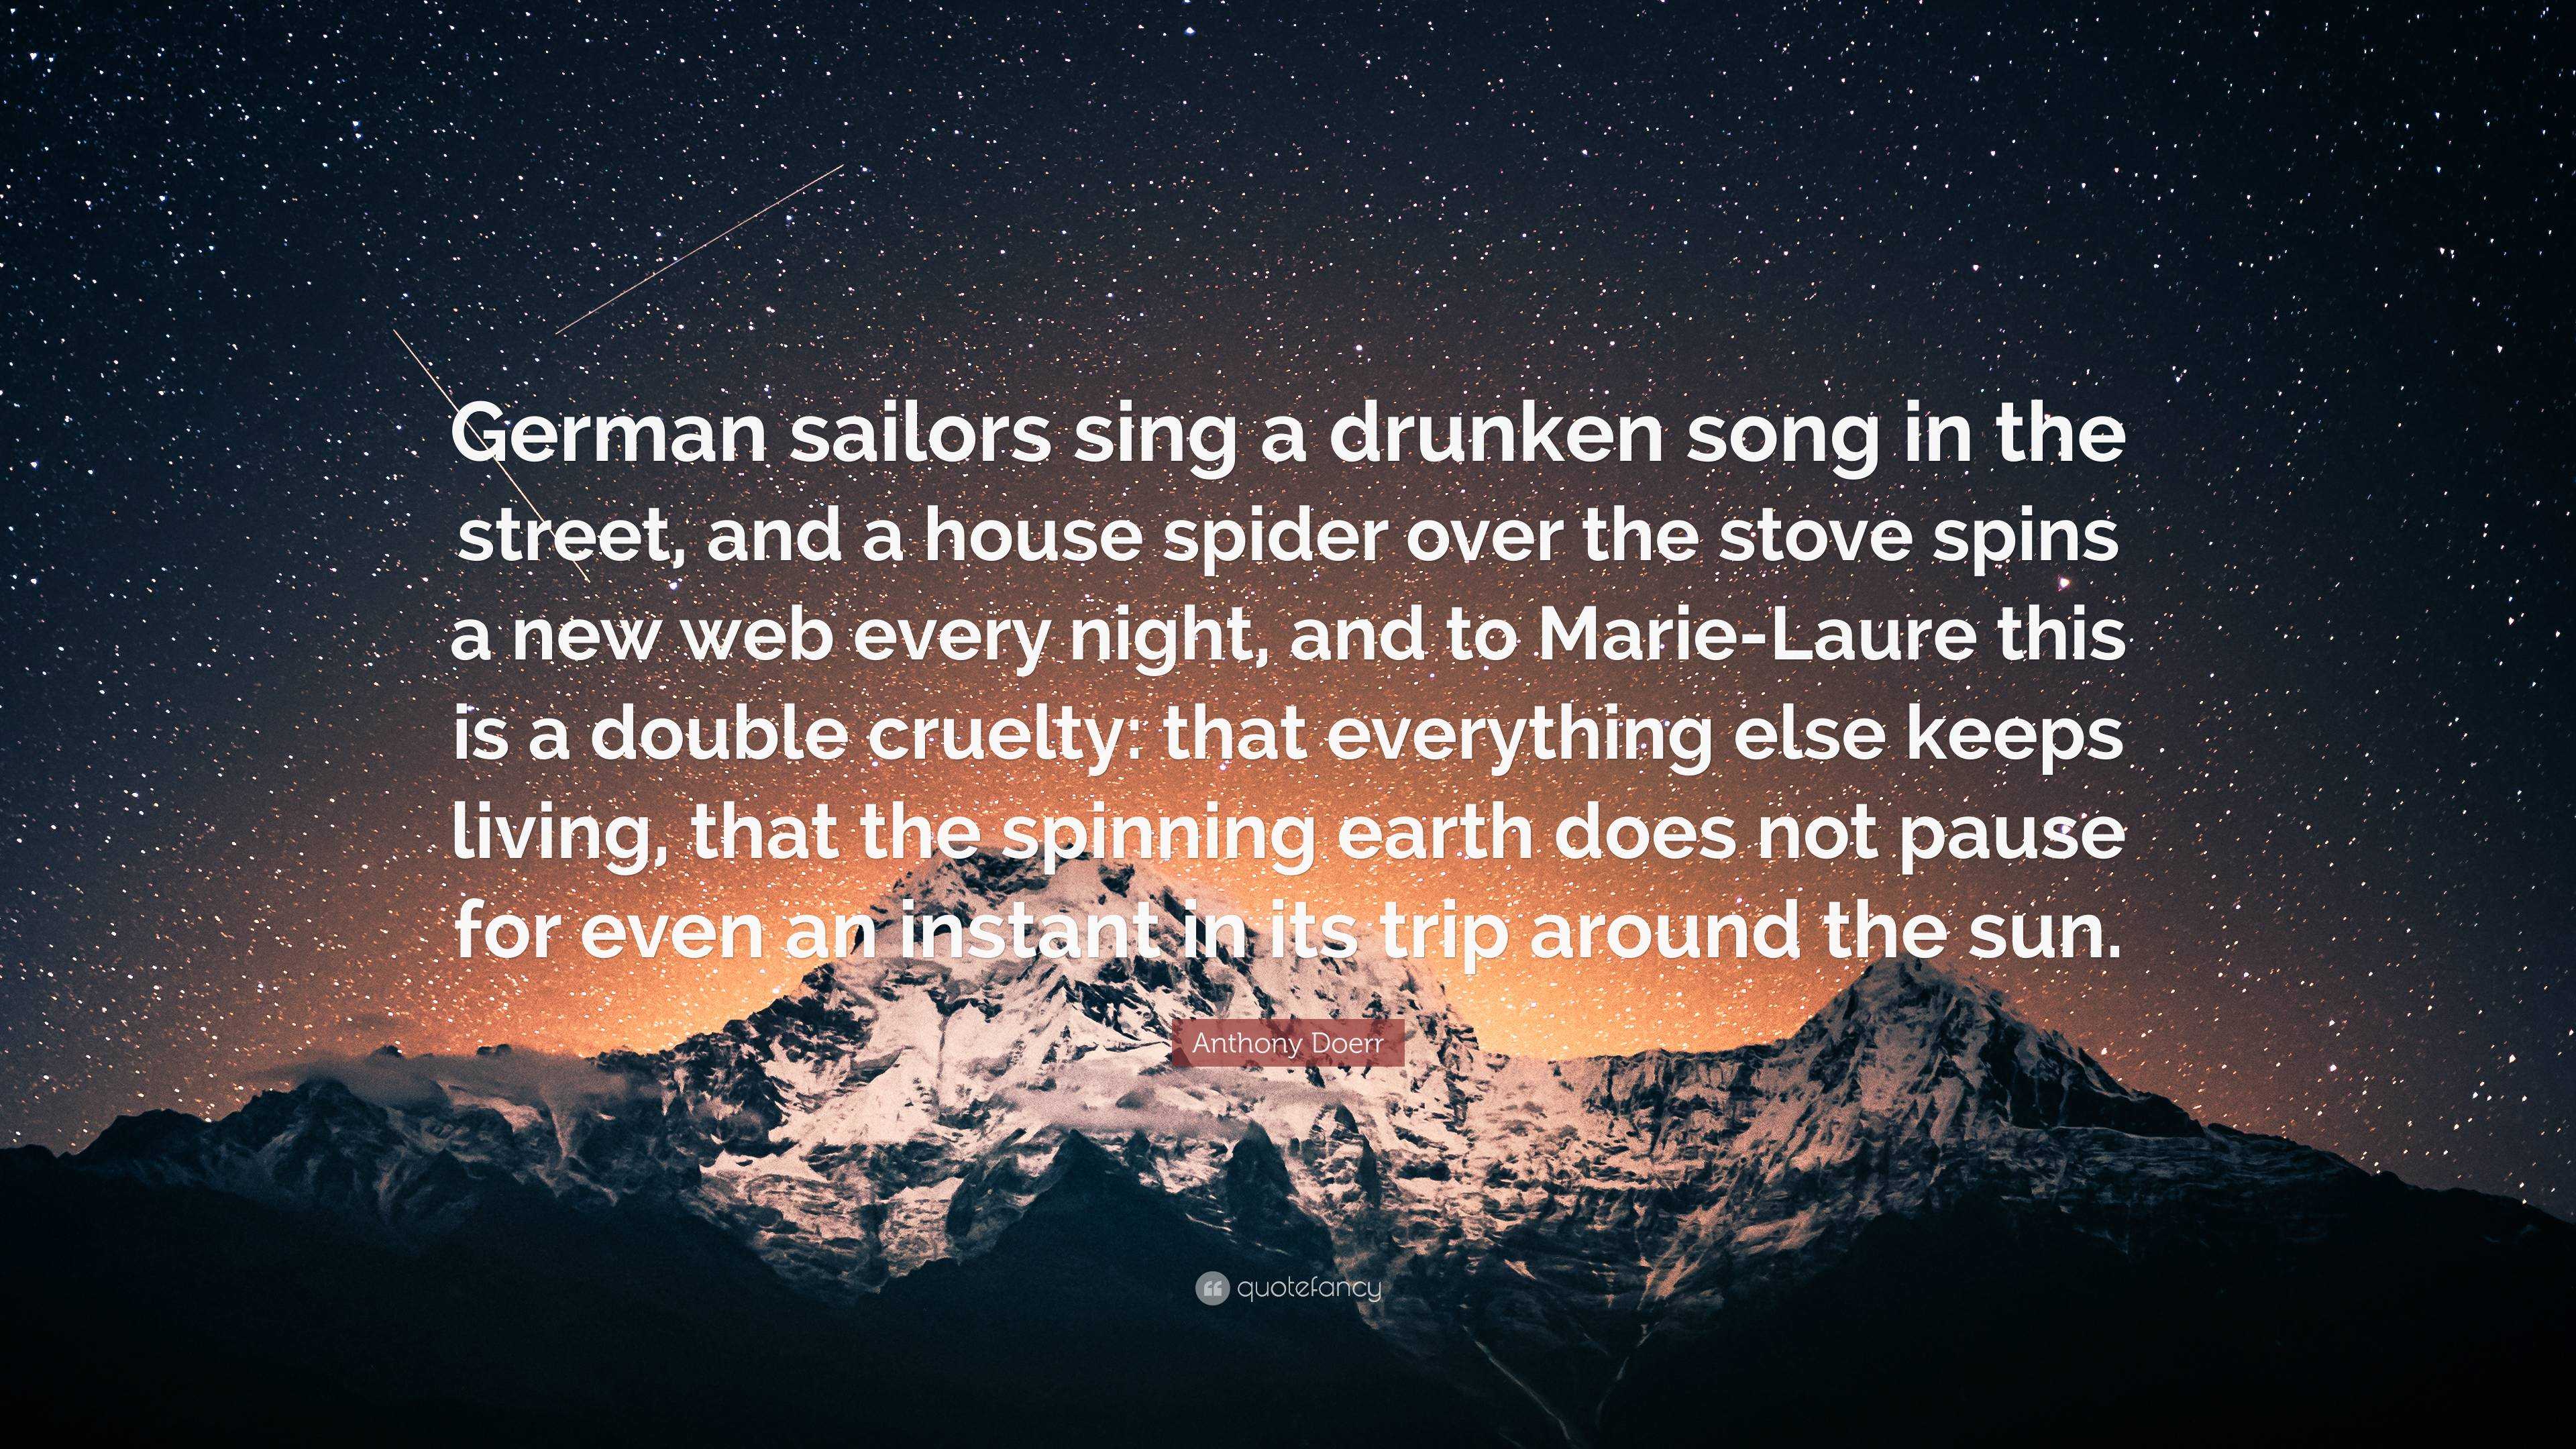 The Spider Spins Its Web Song